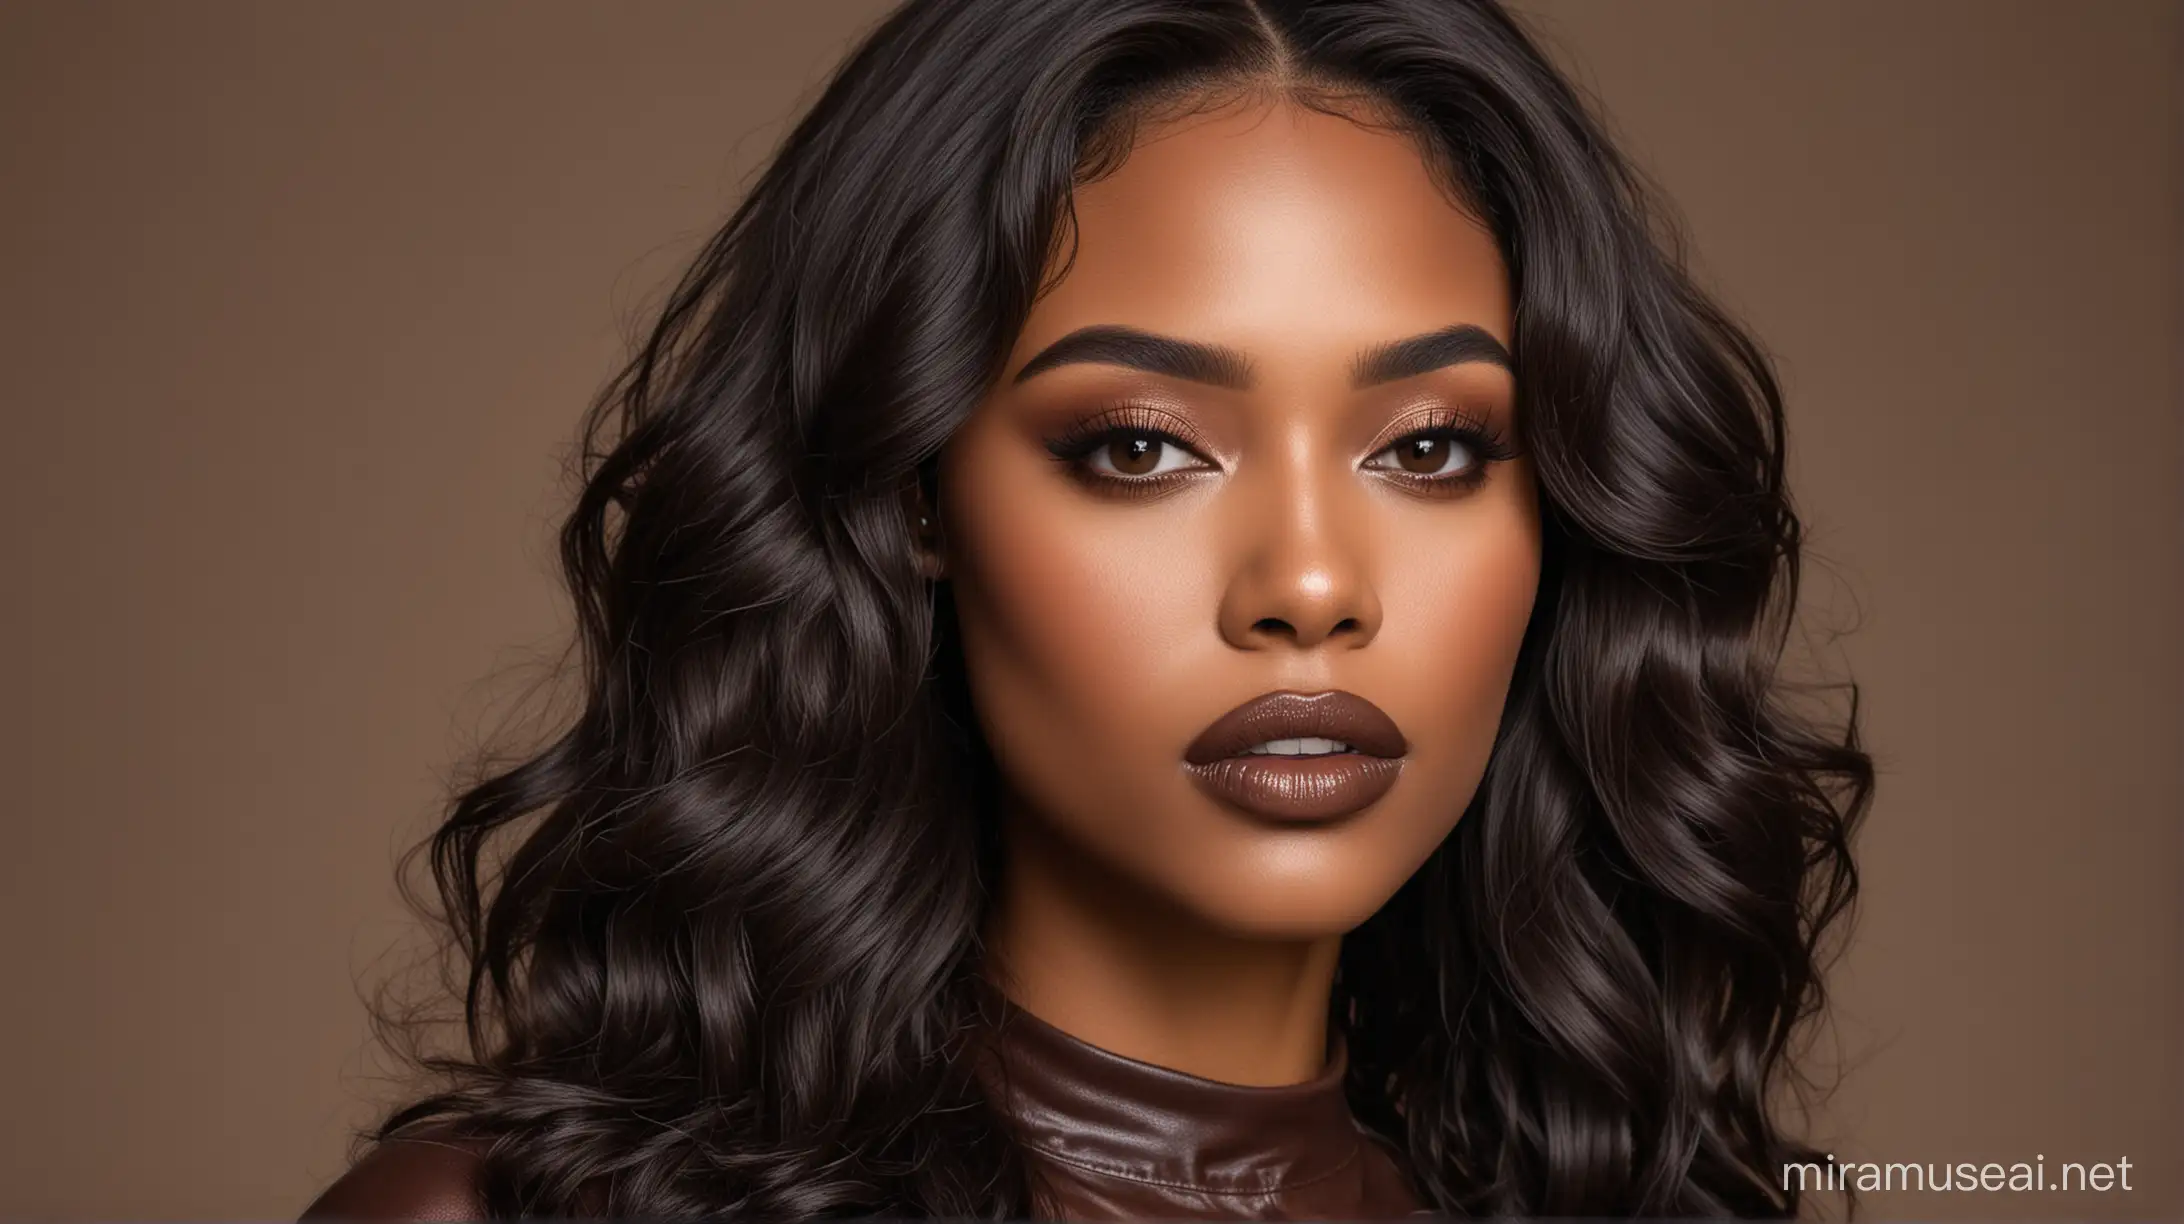 Images of a beautiful dark brown skin black woman wearing long black wavy hairstyle, Modeling a soft pretty makeup look wearing a dark colored chocolate brown lip gloss, She is wearing a chocolate brown leather top